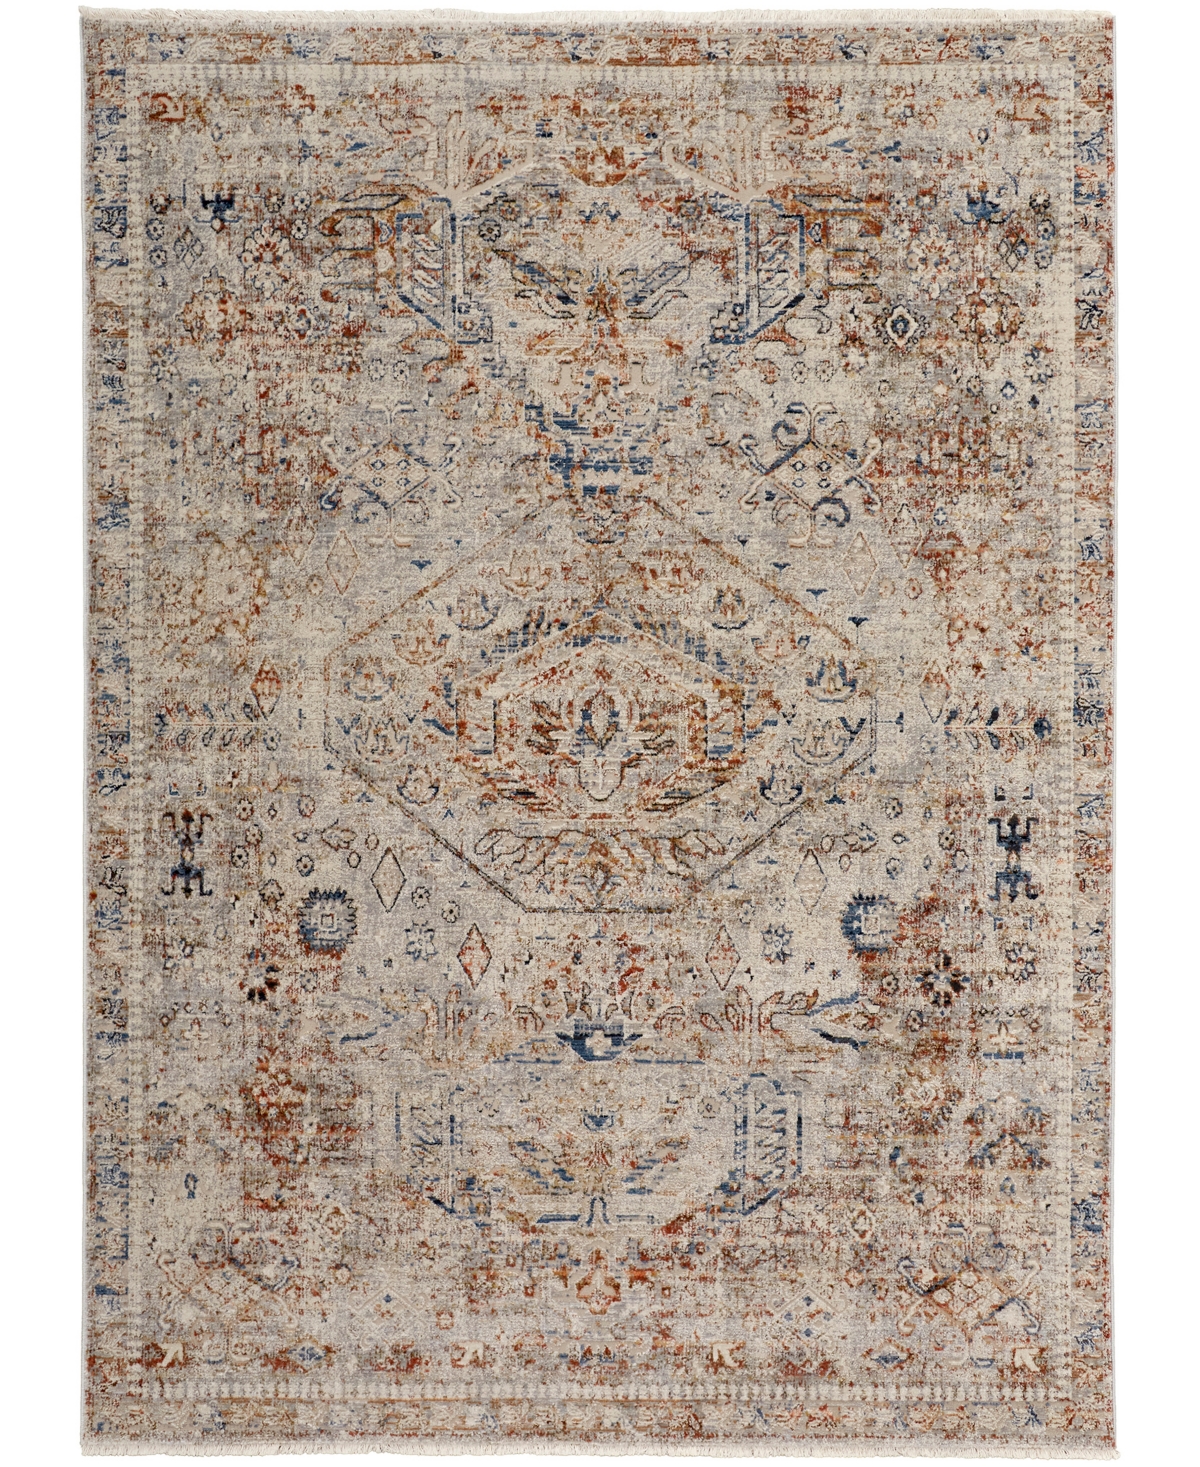 Feizy Frencess R39GJ 5' x 7'9in Area Rug - Gray, Multi